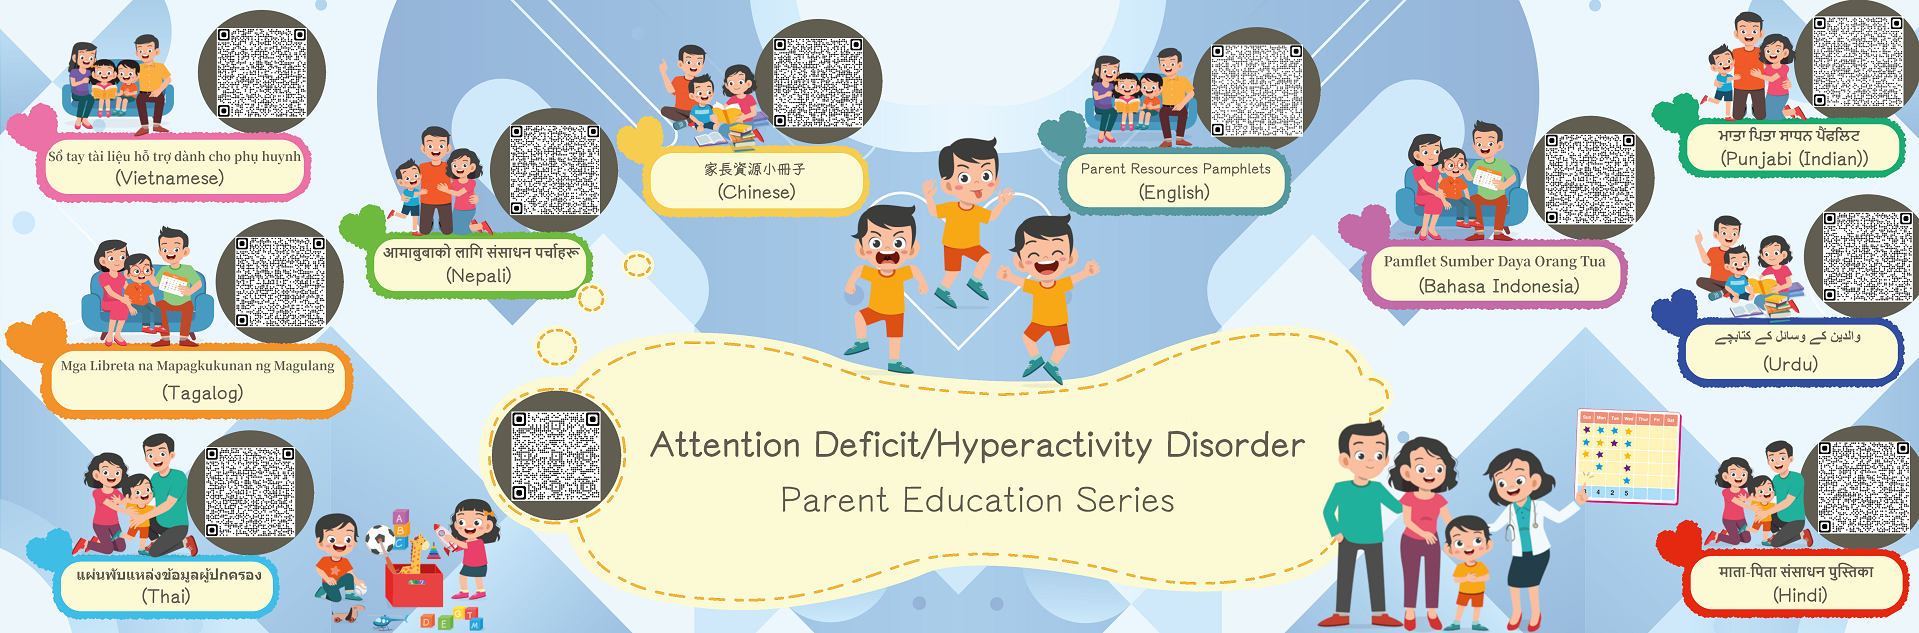 "Attention Deficit/Hyperactivity Disorder" Parent Education Series